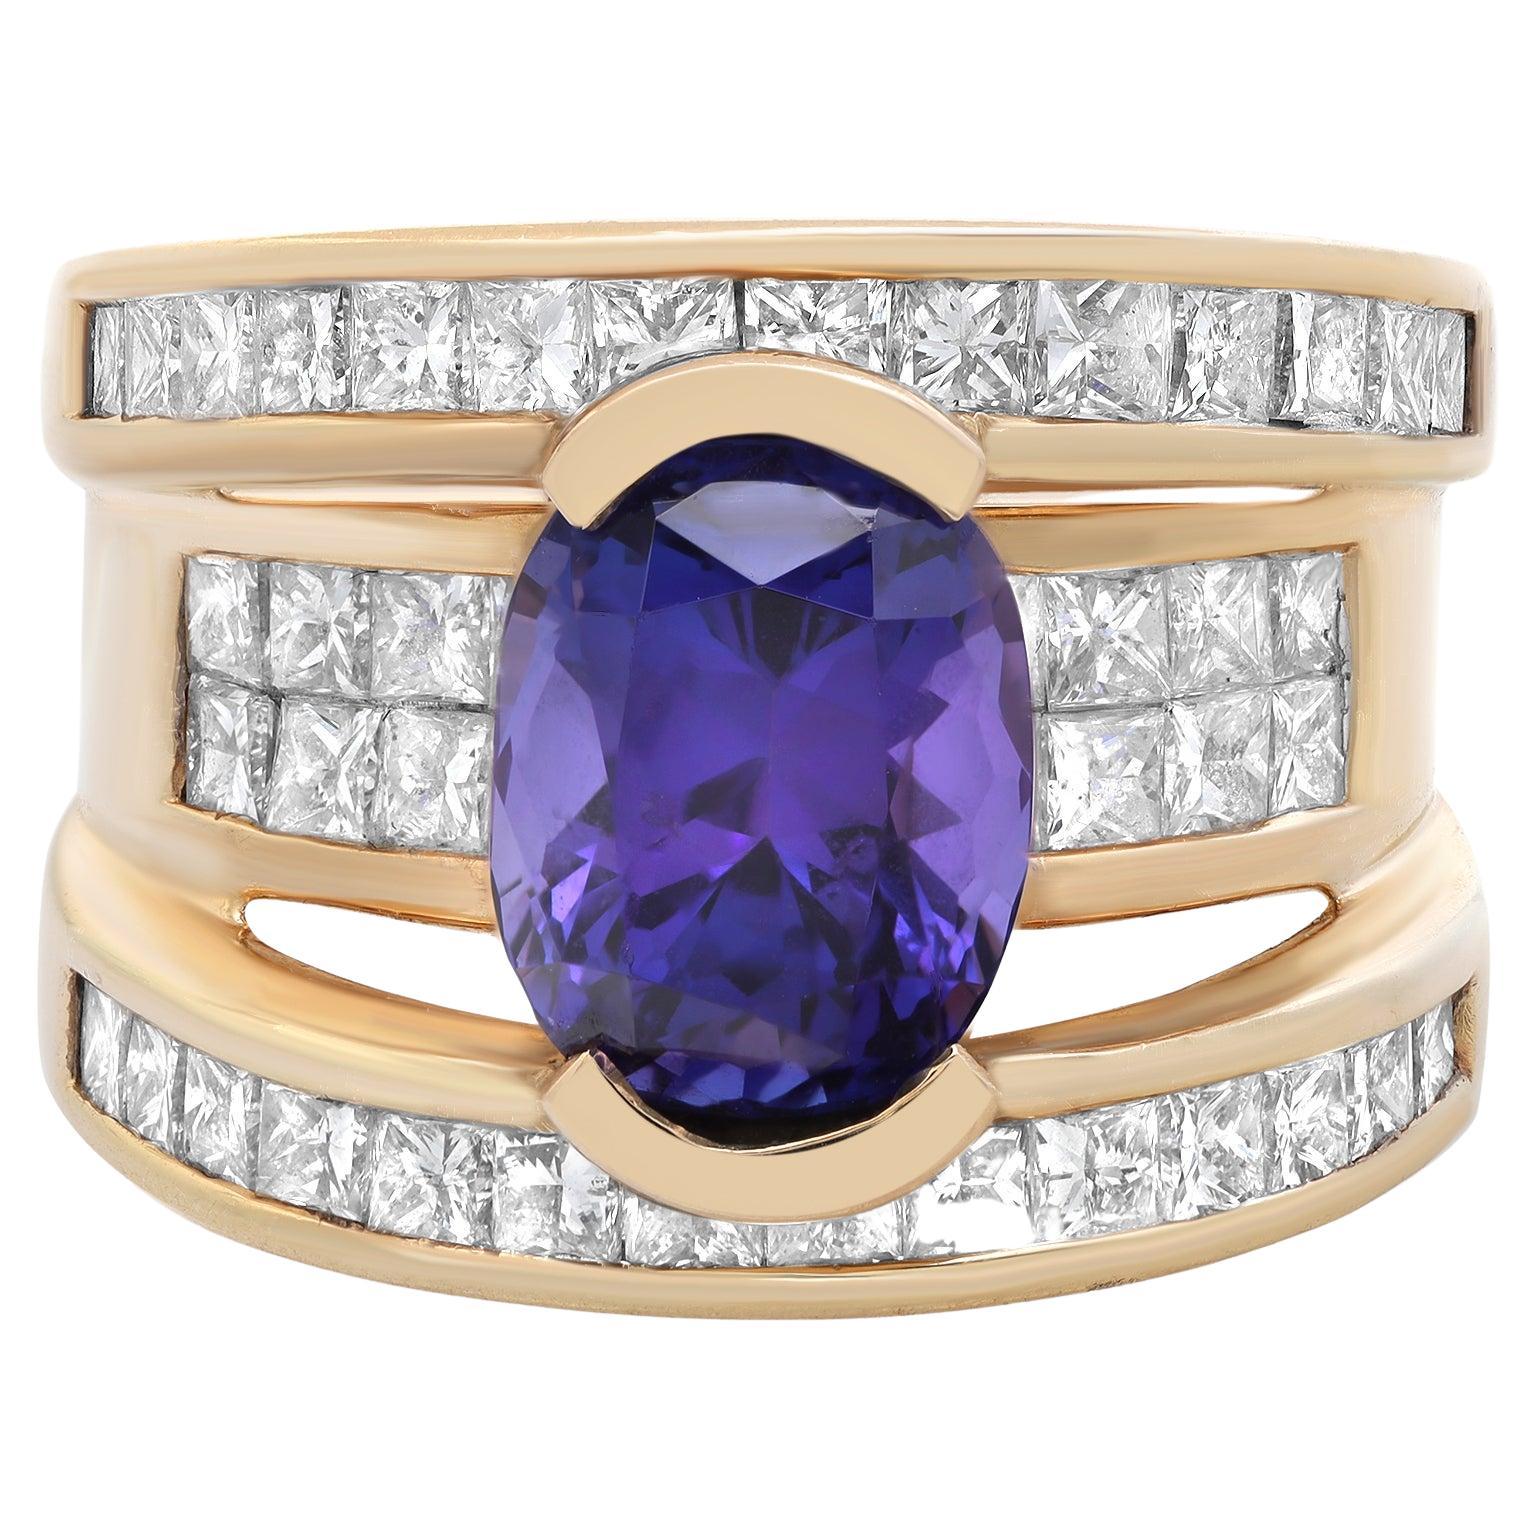 4.05cts Oval Tanzanite & 3.35Cts Diamond Cocktail Ring 14K Yellow Gold